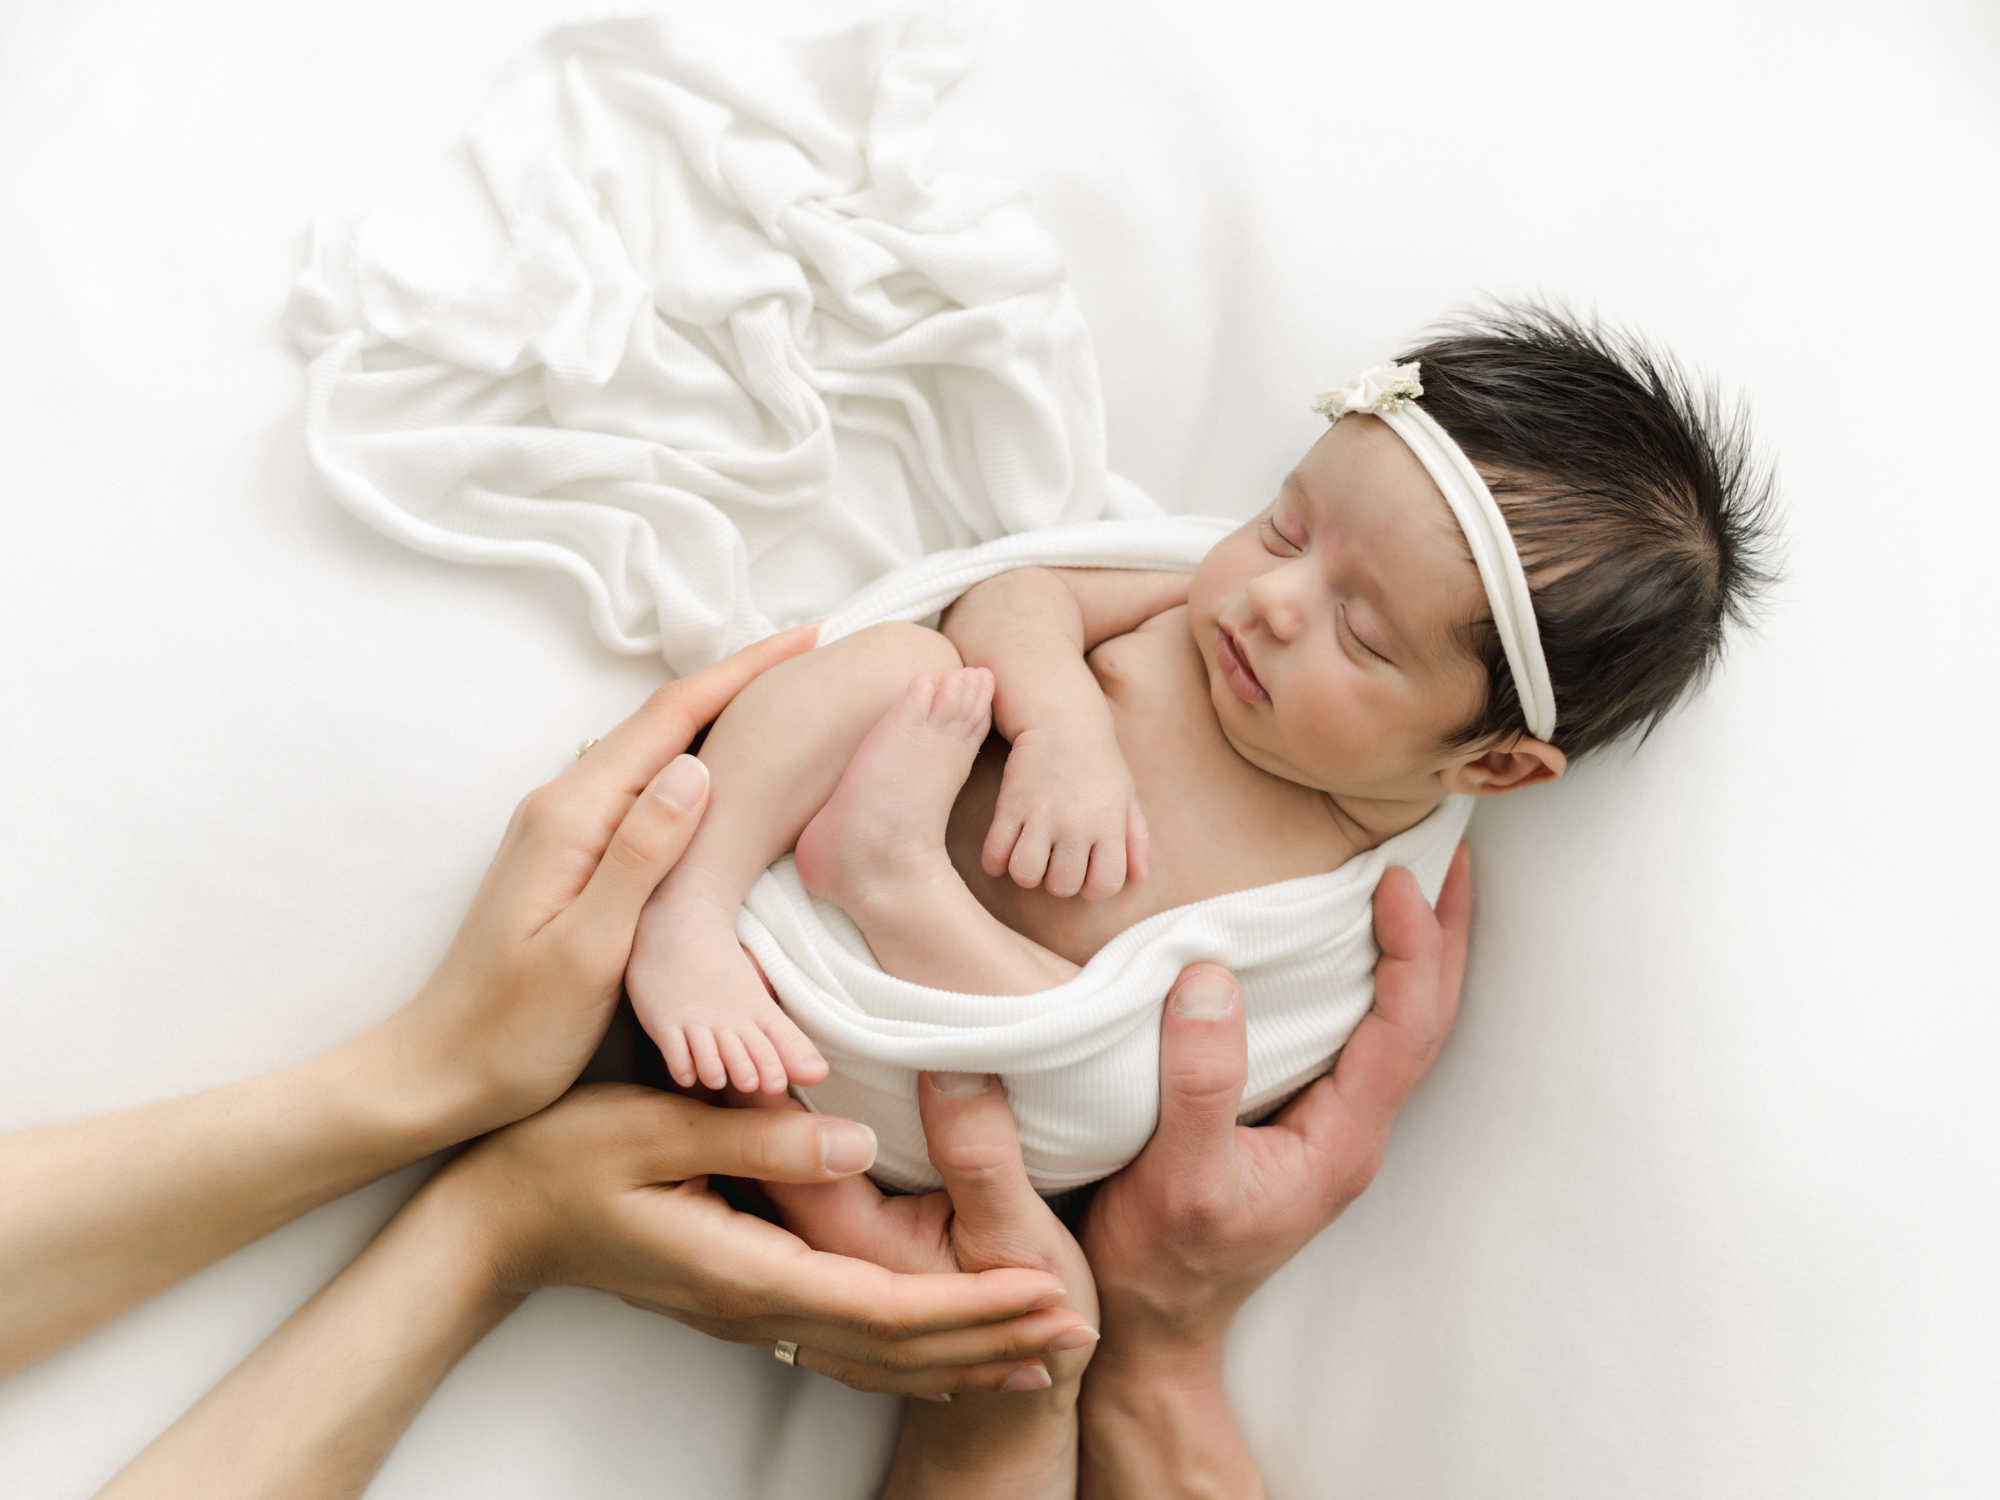 simple newborn photo with hands